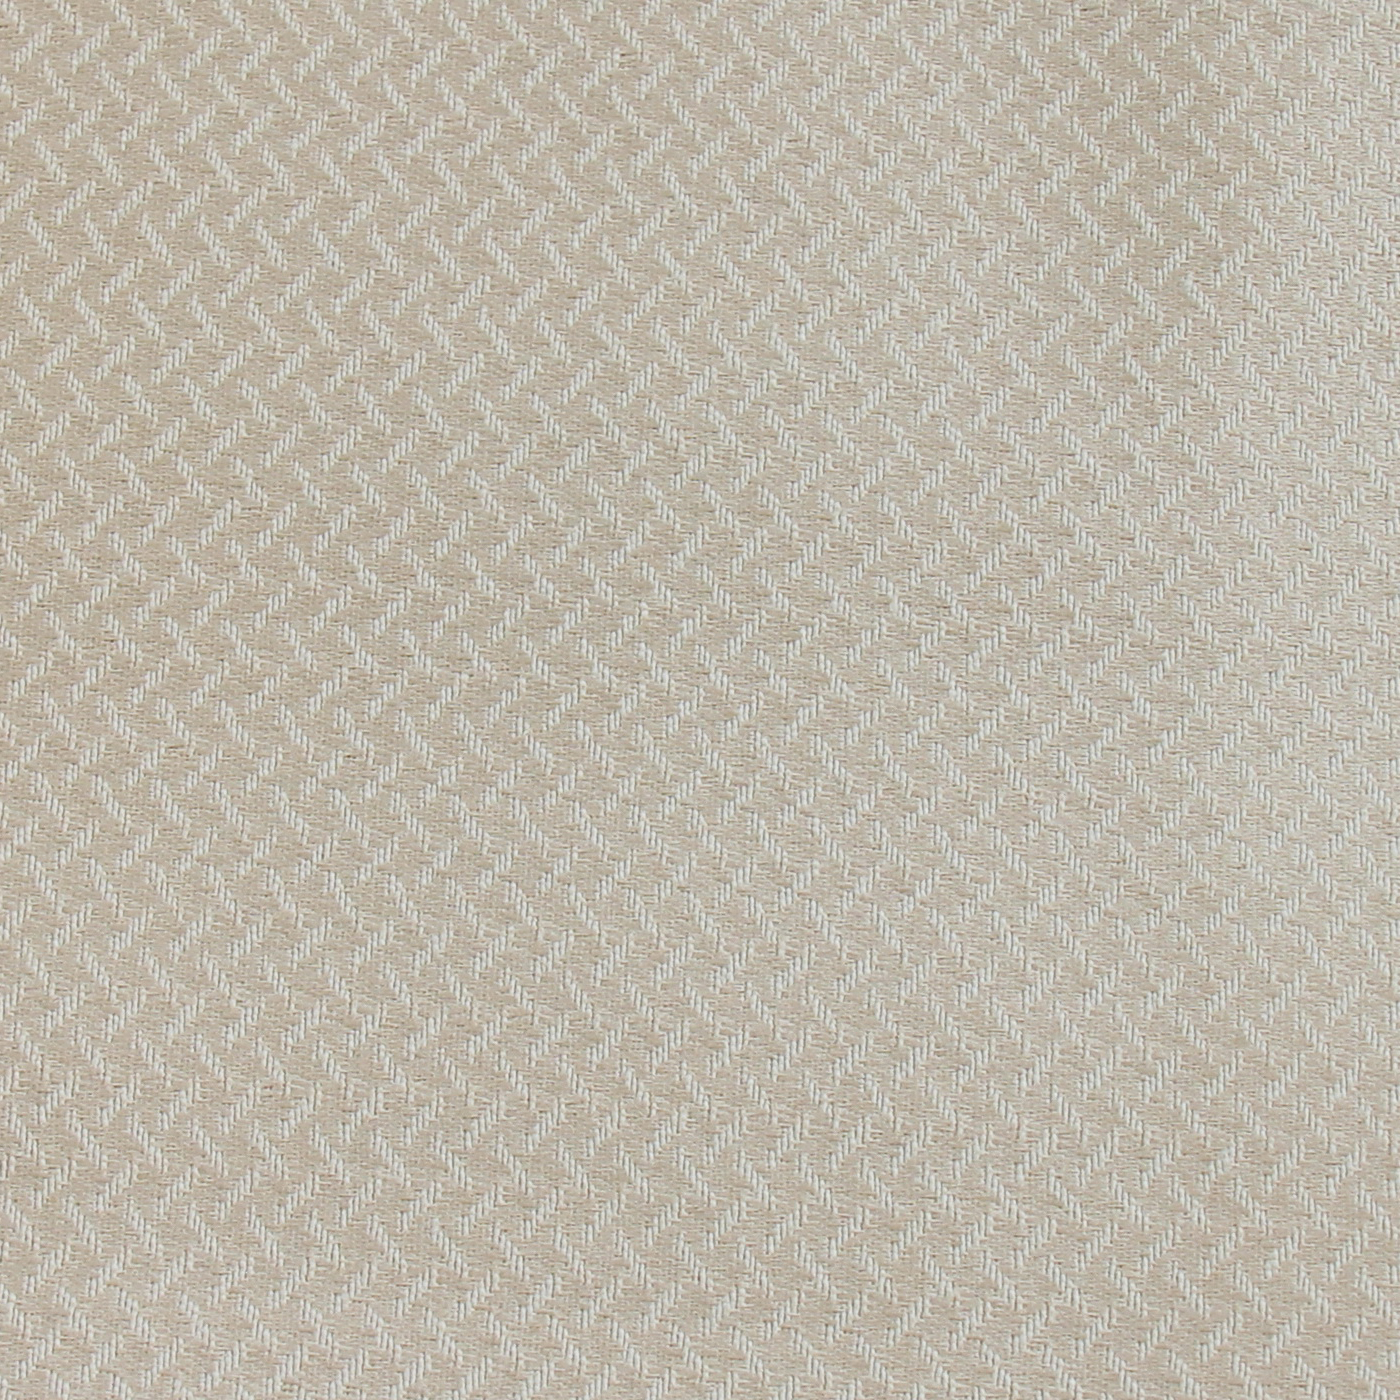 NO 31-45 RS X1 NO 9 Fabric Upholstery Sample